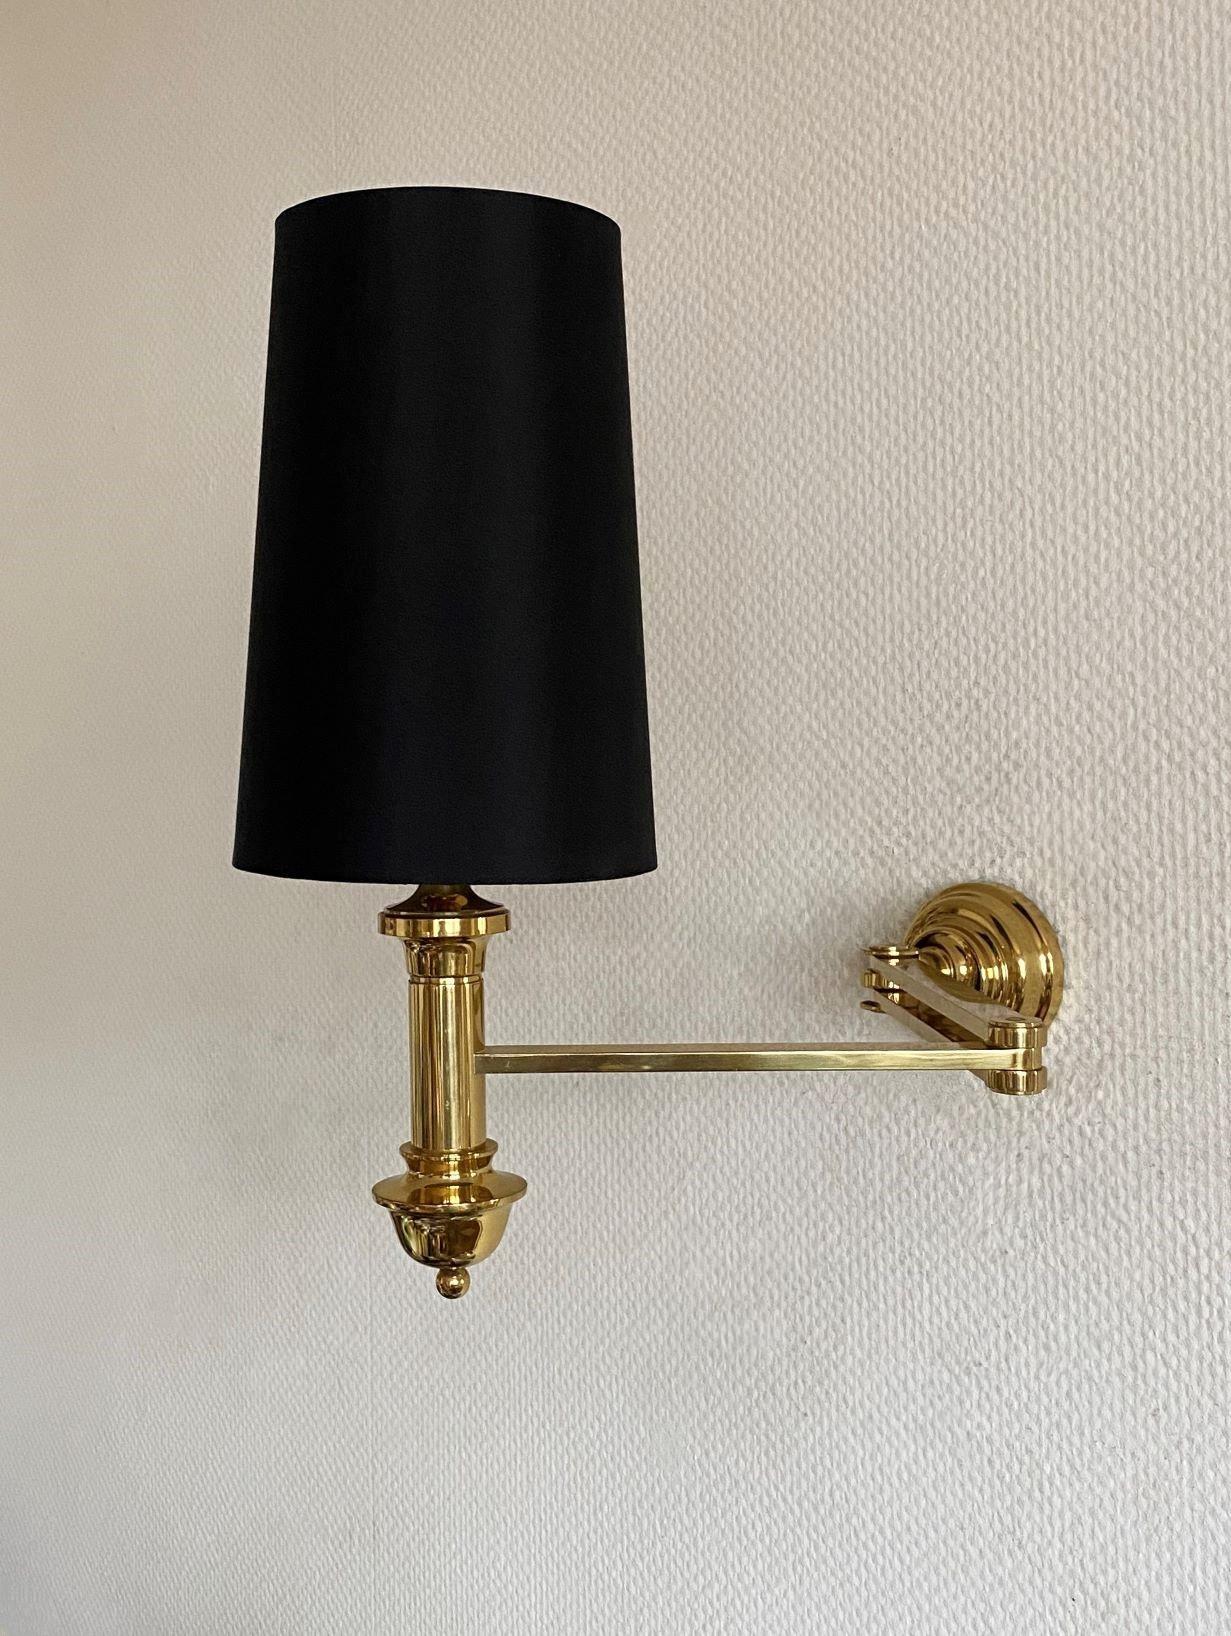 Pair of Brass Swing Arm Wall Lights, 1960s For Sale 5